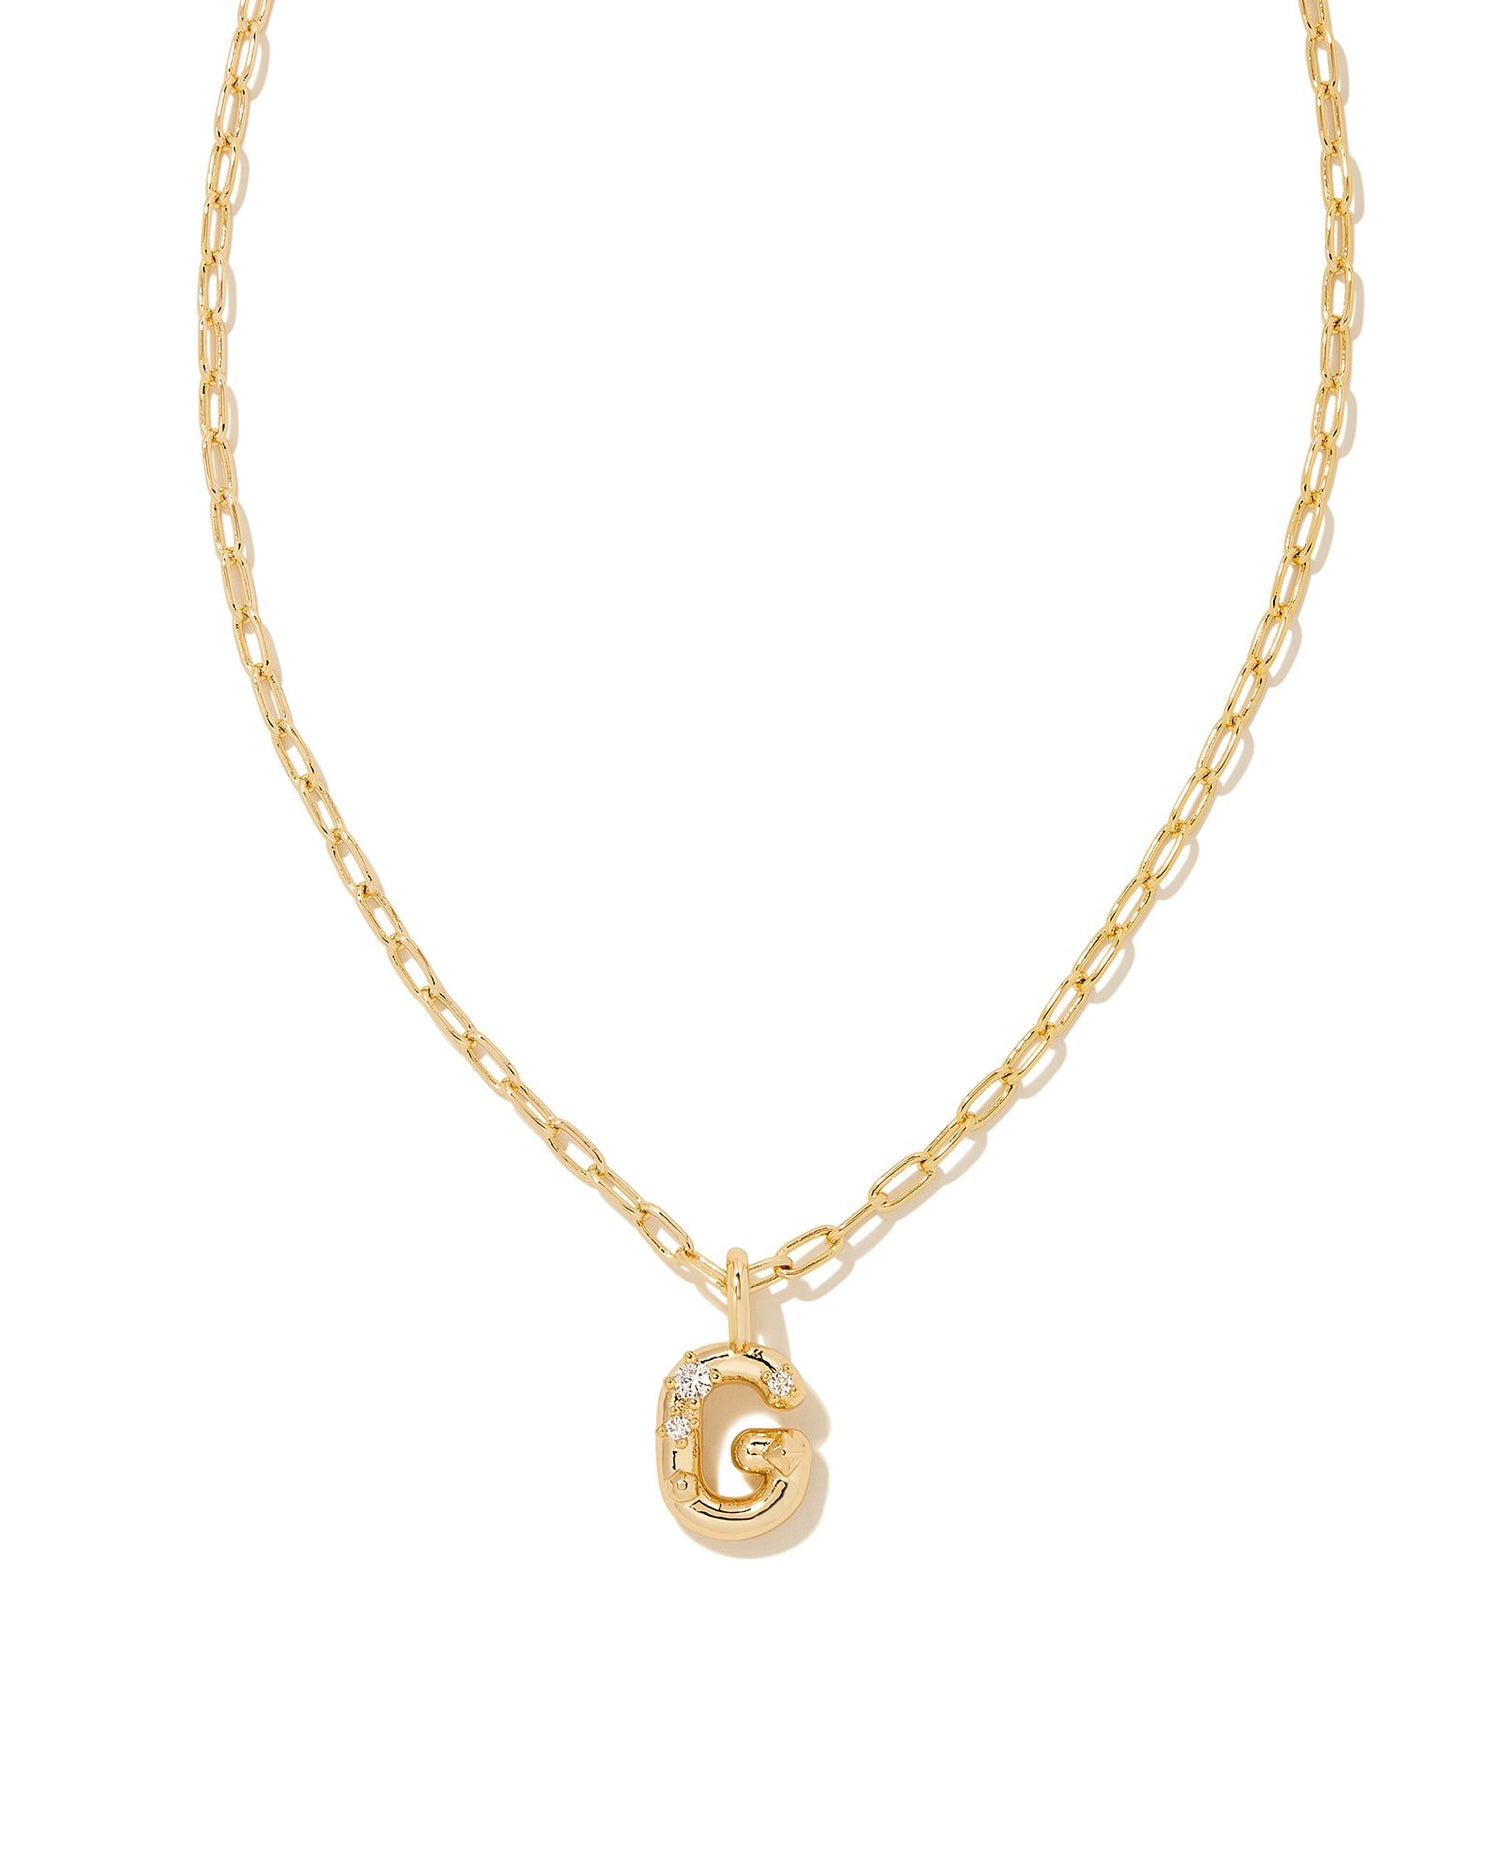 Personalize your everyday look with the Crystal Letter Short Pendant Necklace in White Crystal. Whether you’re rocking your initial or a loved one’s, this sentimental layer is one you’ll keep coming back to again and again.  Dimensions- 16' CHAIN WITH 3' EXTENDER, 0.62'L X 0.35"W PENDANT Metal- 14K Gold plated over brass Closure- Lobster Clasp Material-   White CZ Letter G